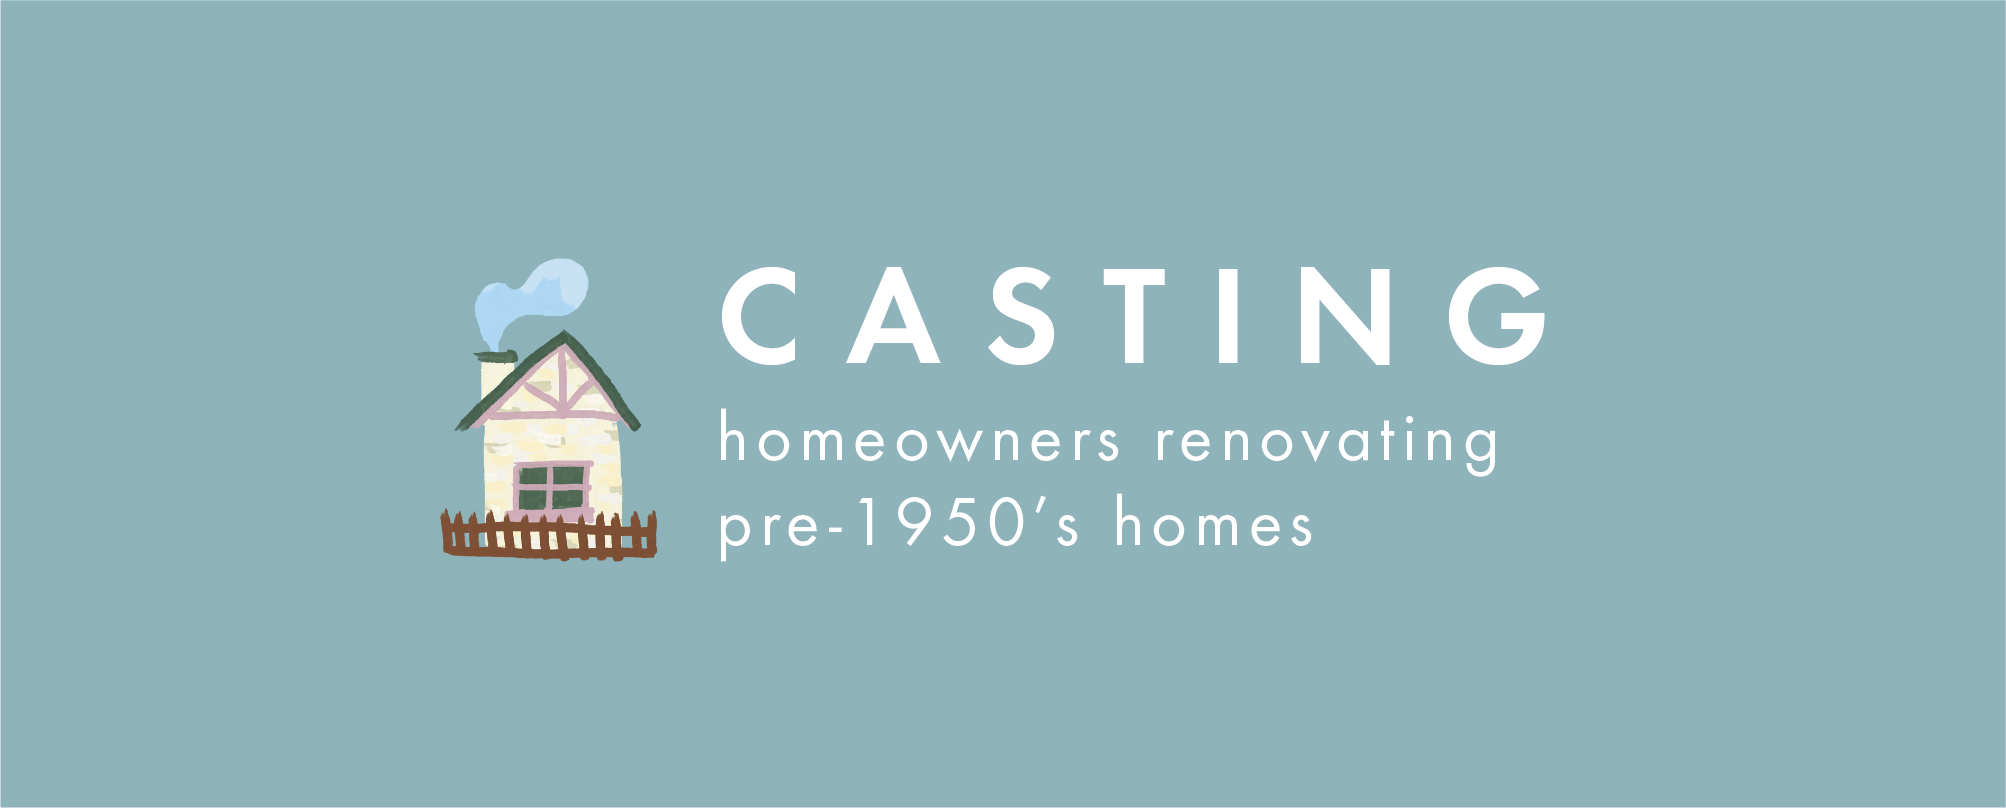 Casting homeowners renovating pre-1950's homes